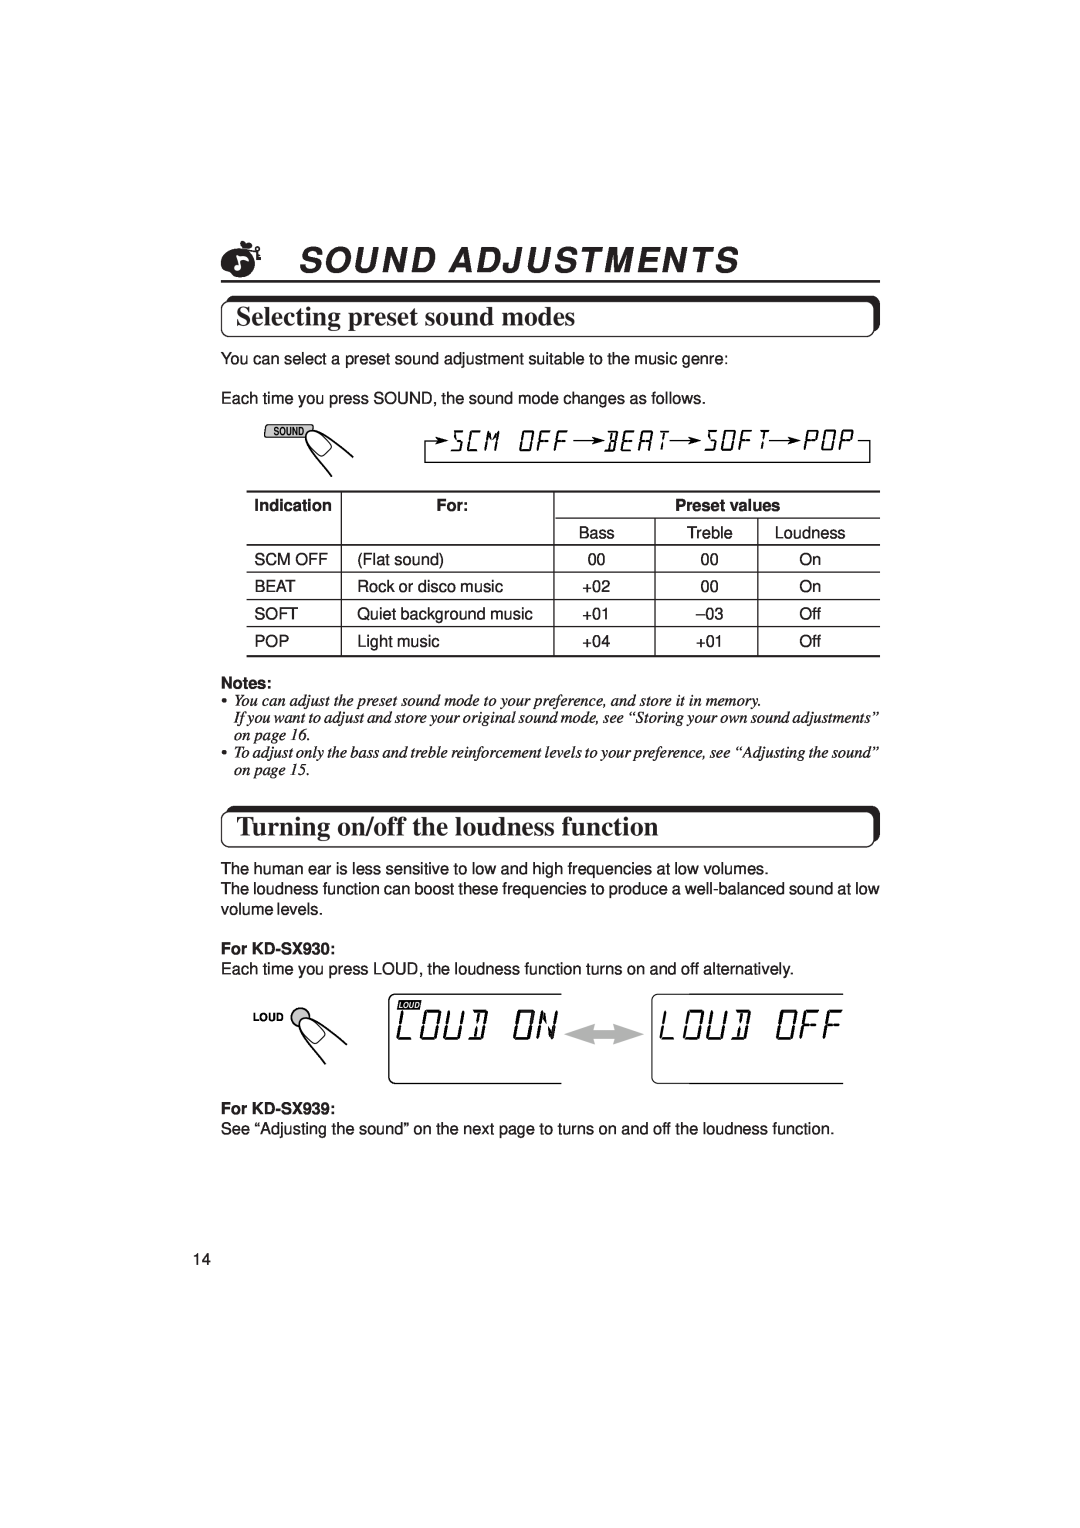 JVC KD-SX939/SX930 manual Sound Adjustments, Selecting preset sound modes, Turning on/off the loudness function, Indication 